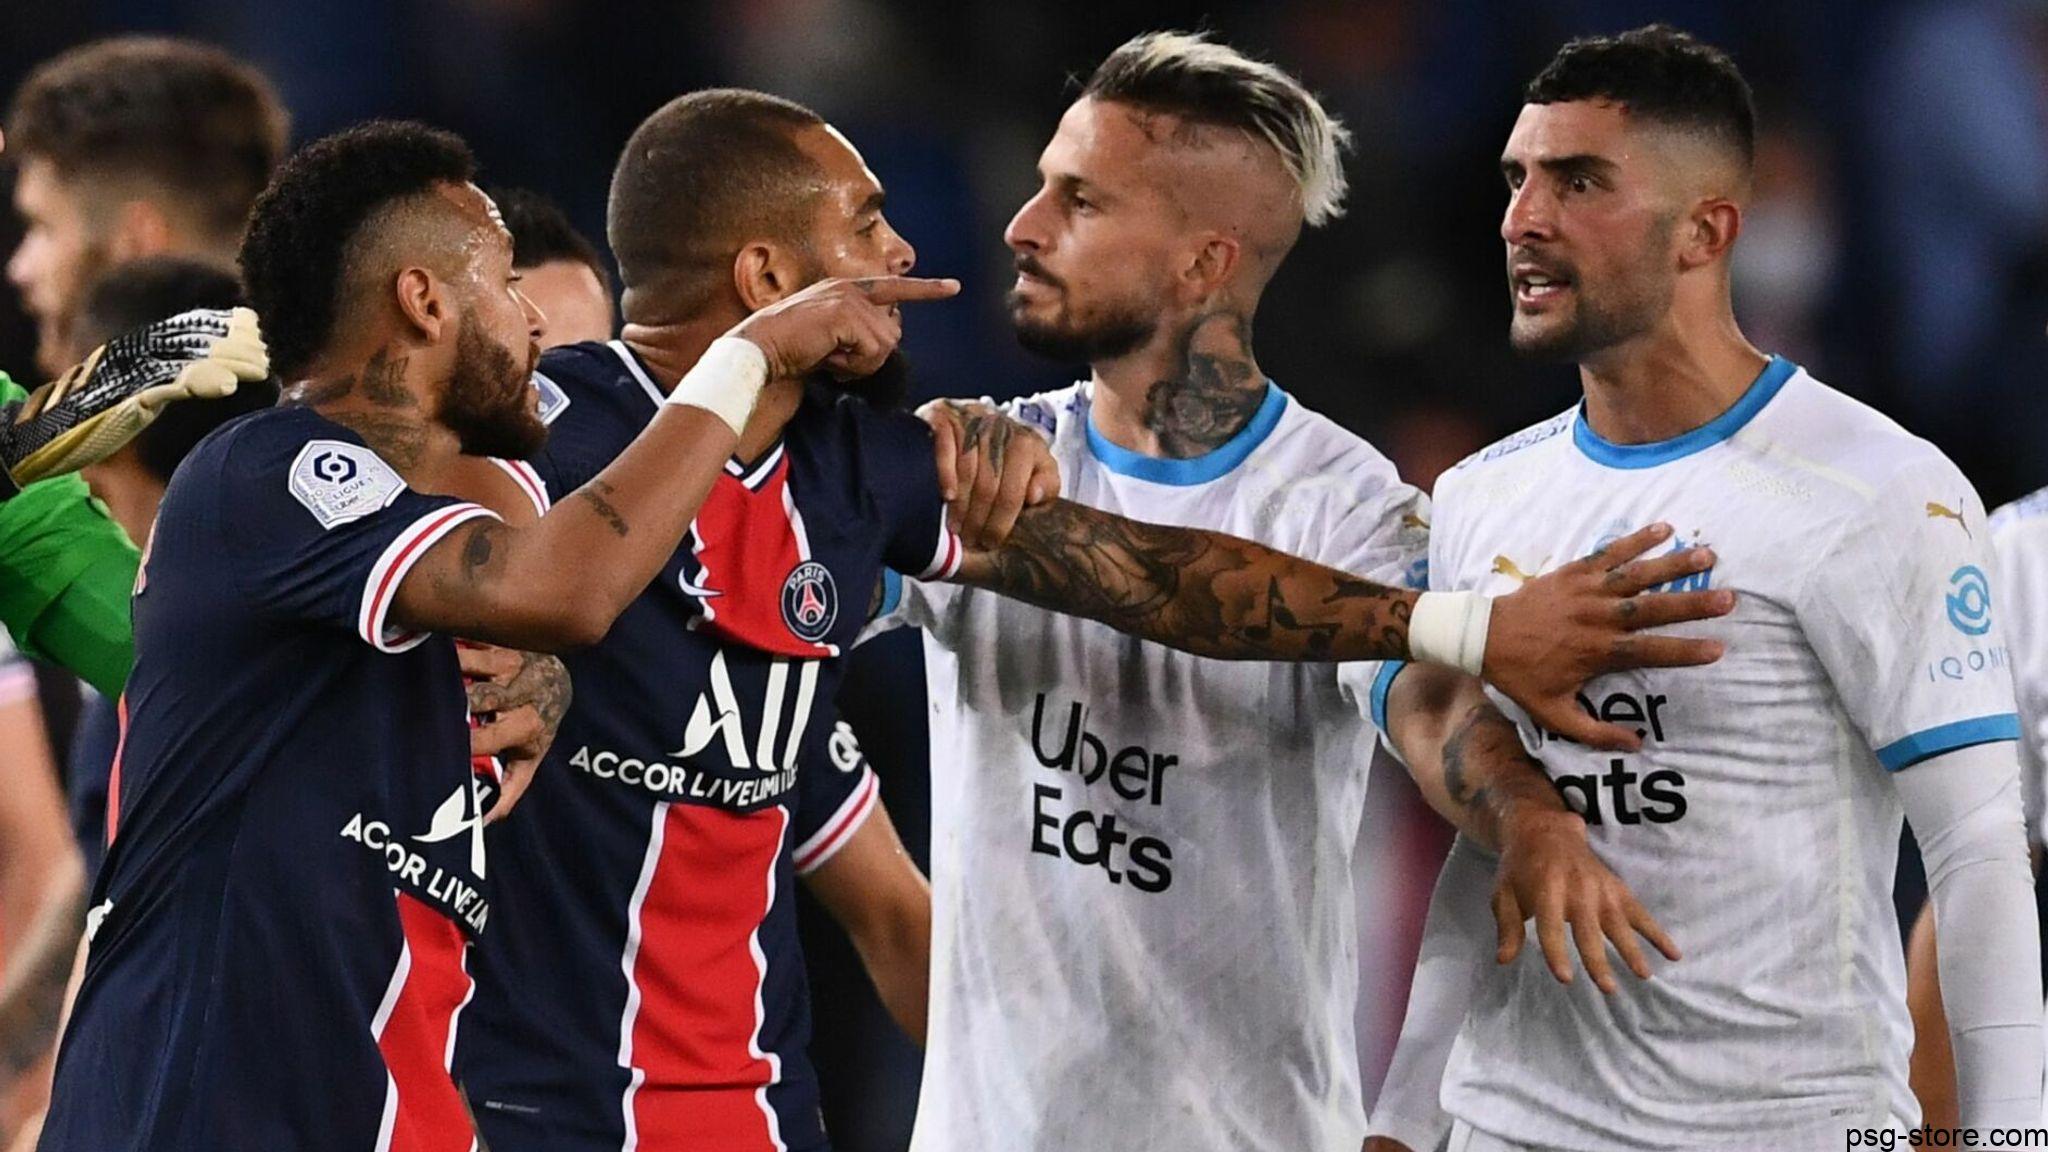 PSG vs Marseille - A Classic Matchup